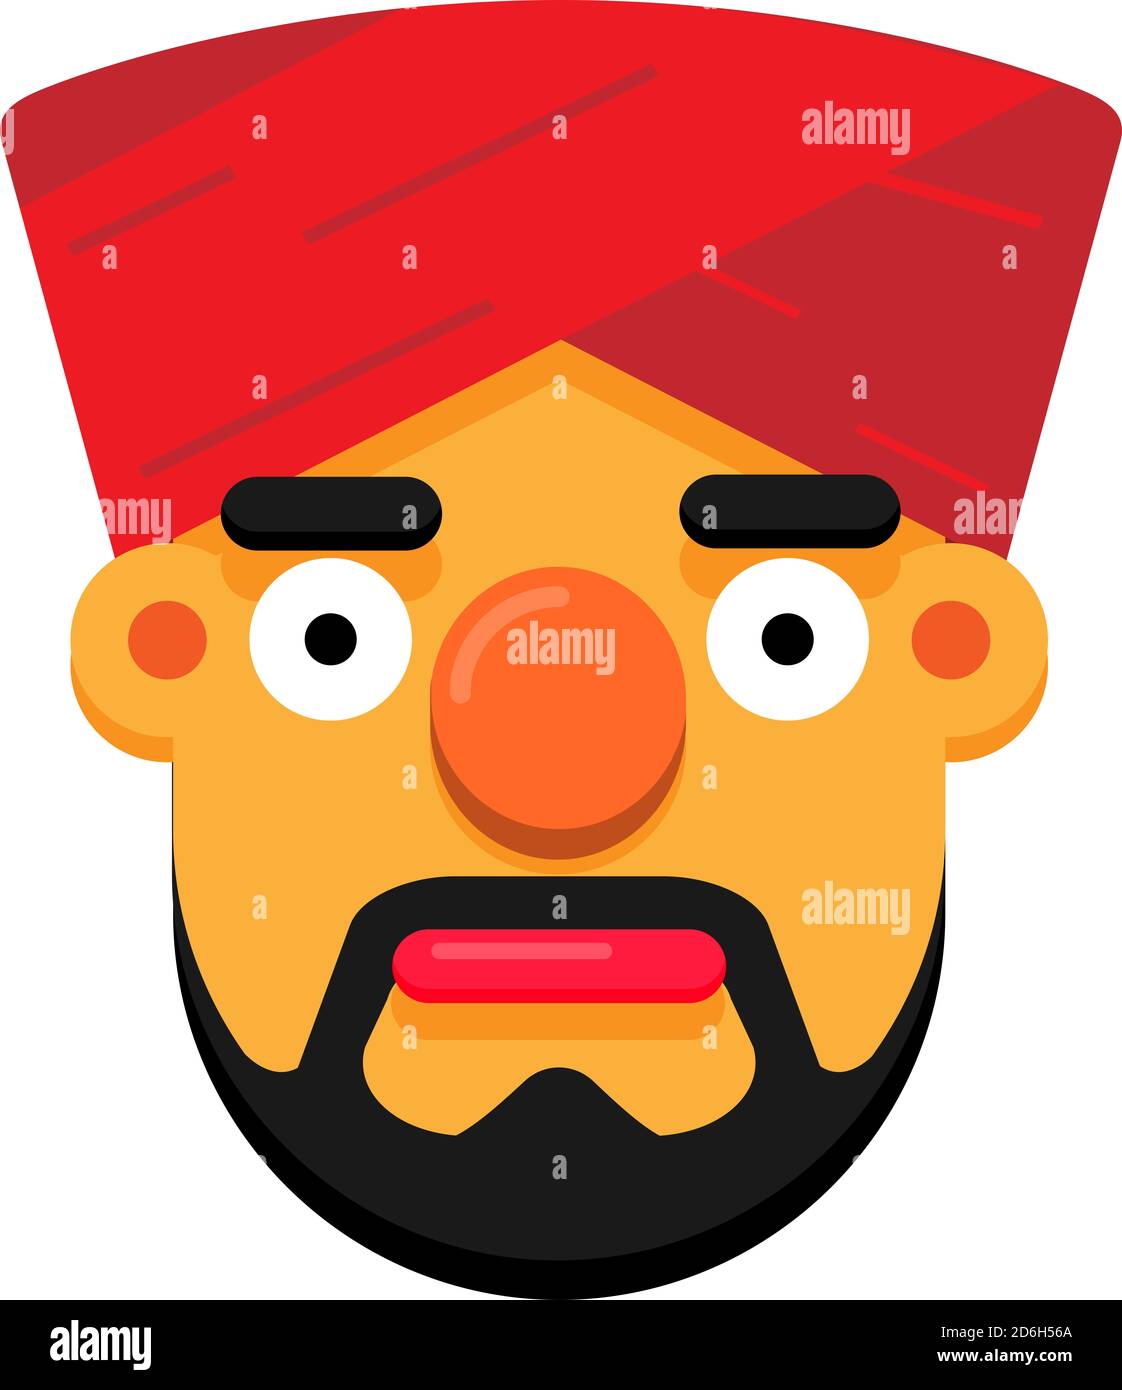 Man Face With Red Turban Vector, illustration. Stock Photo